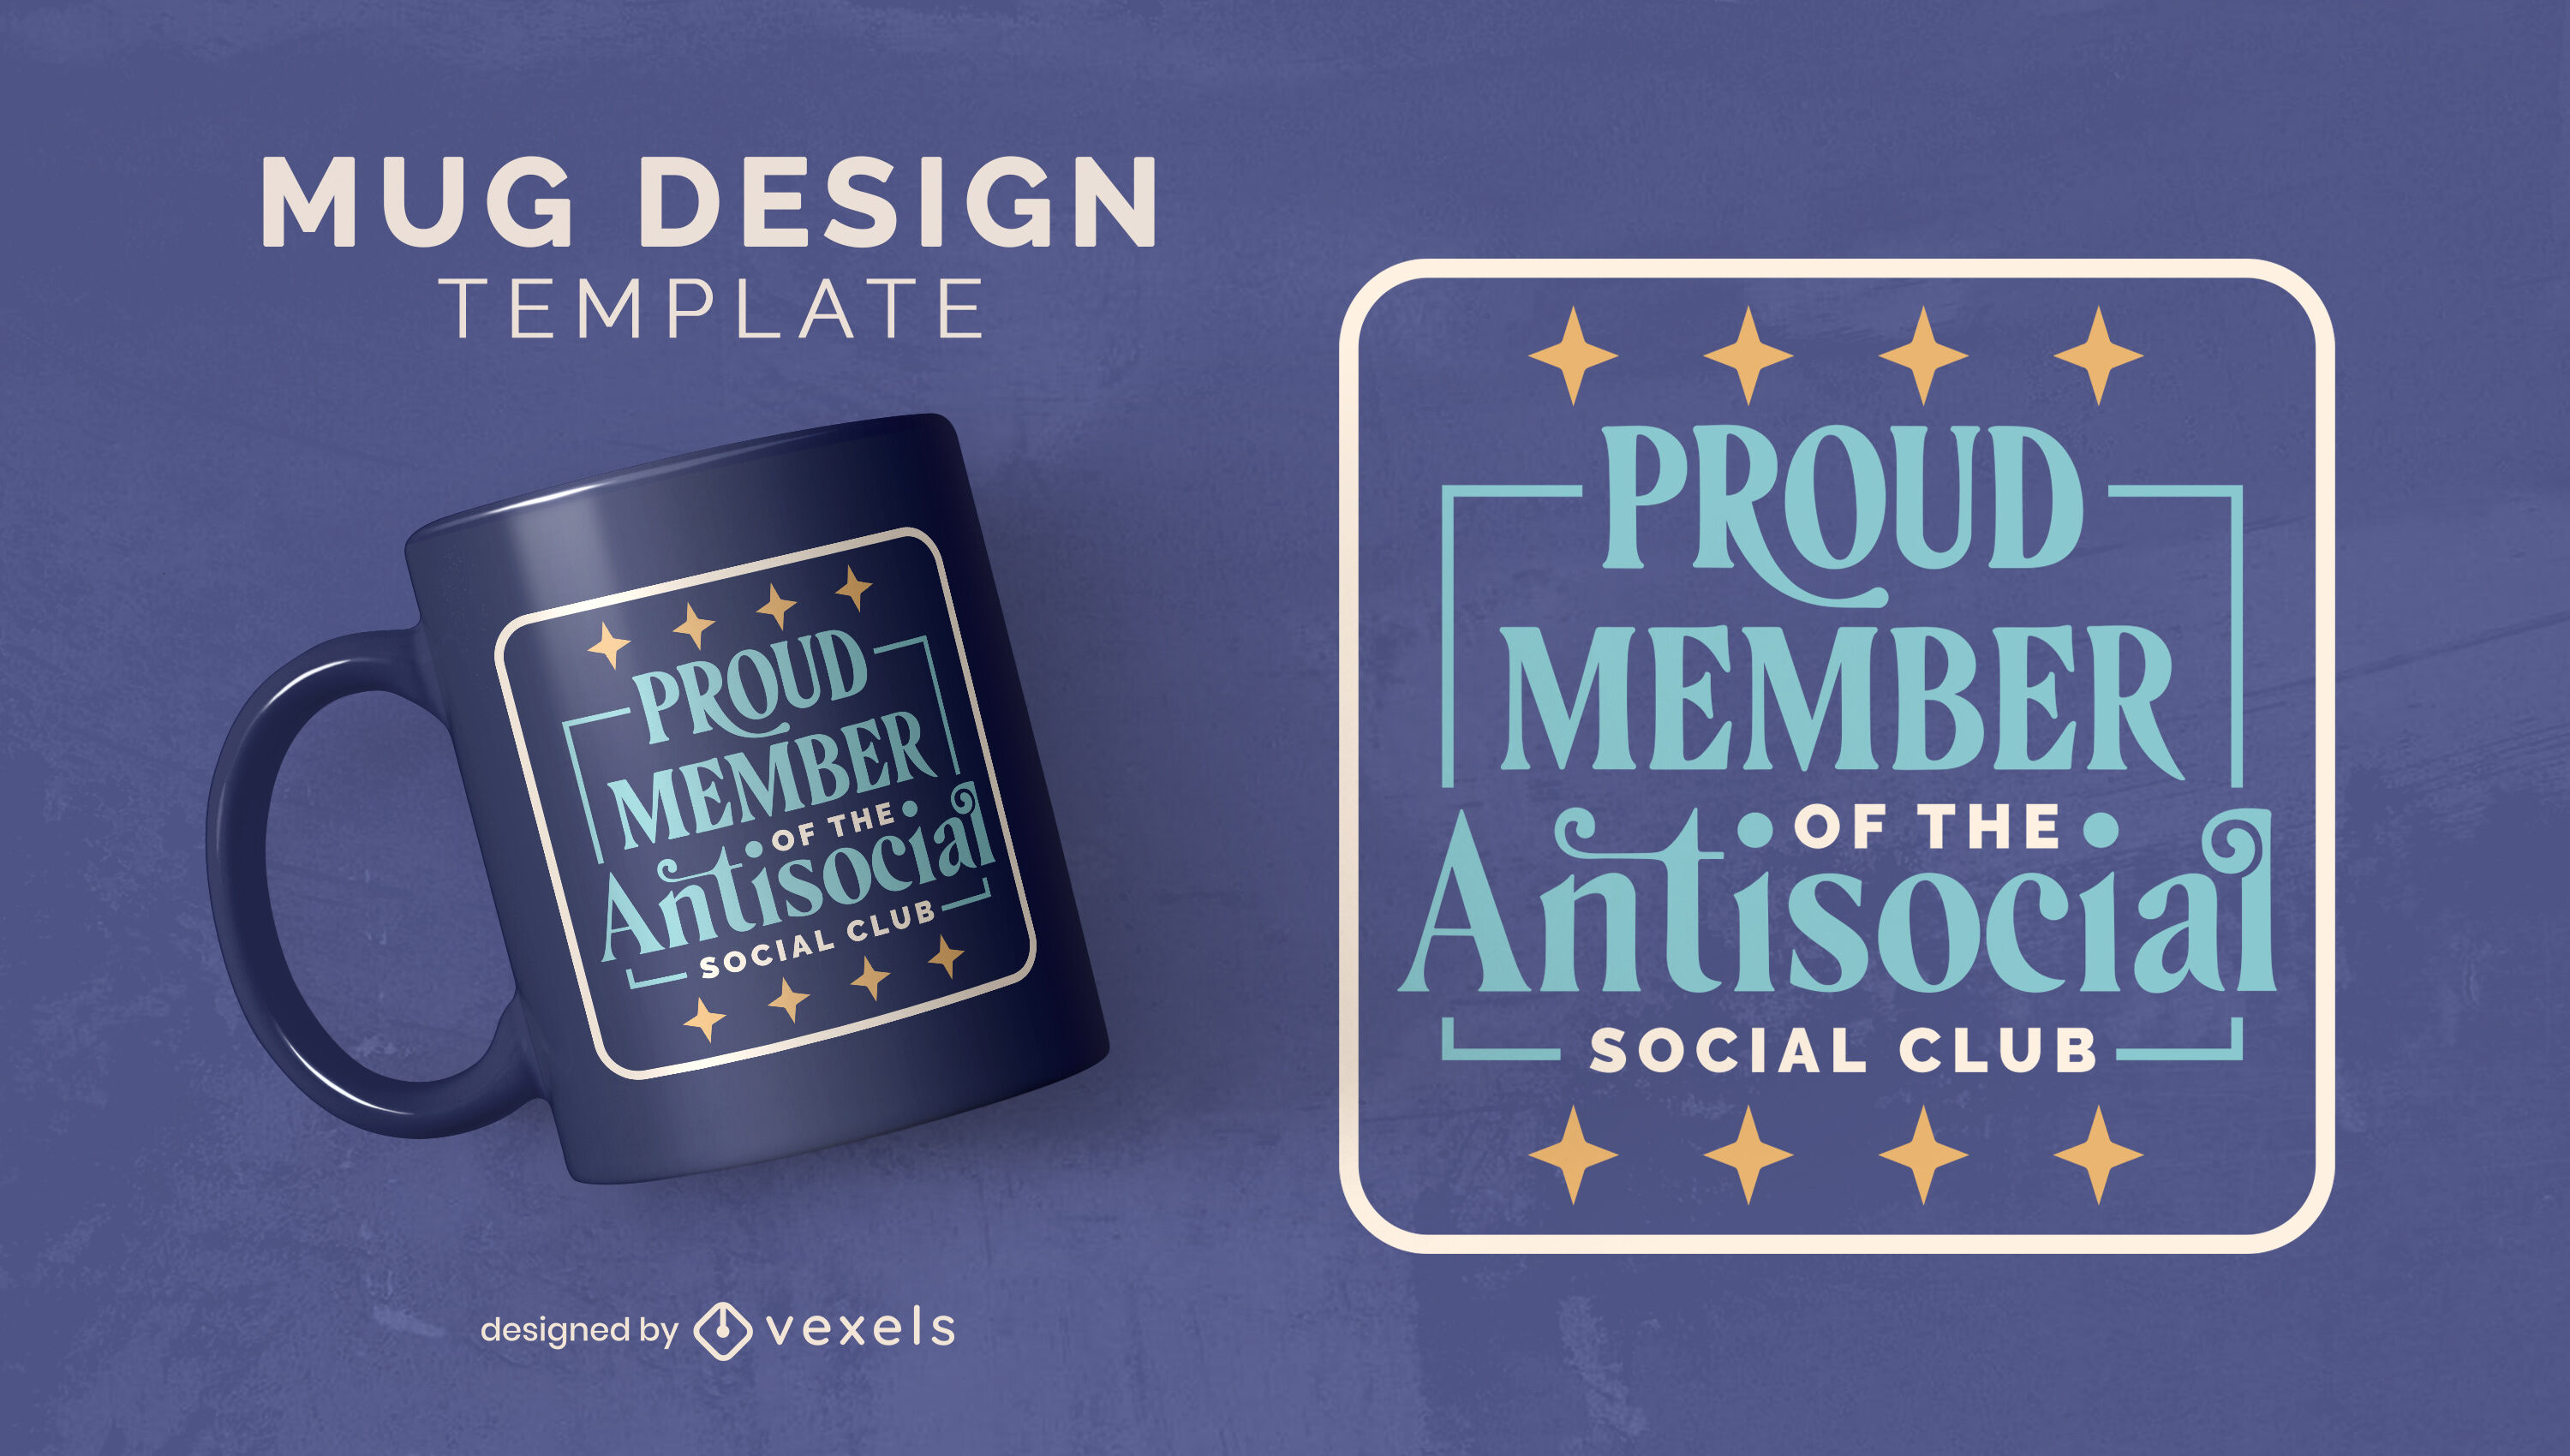 Antisocial club funny quote mug template